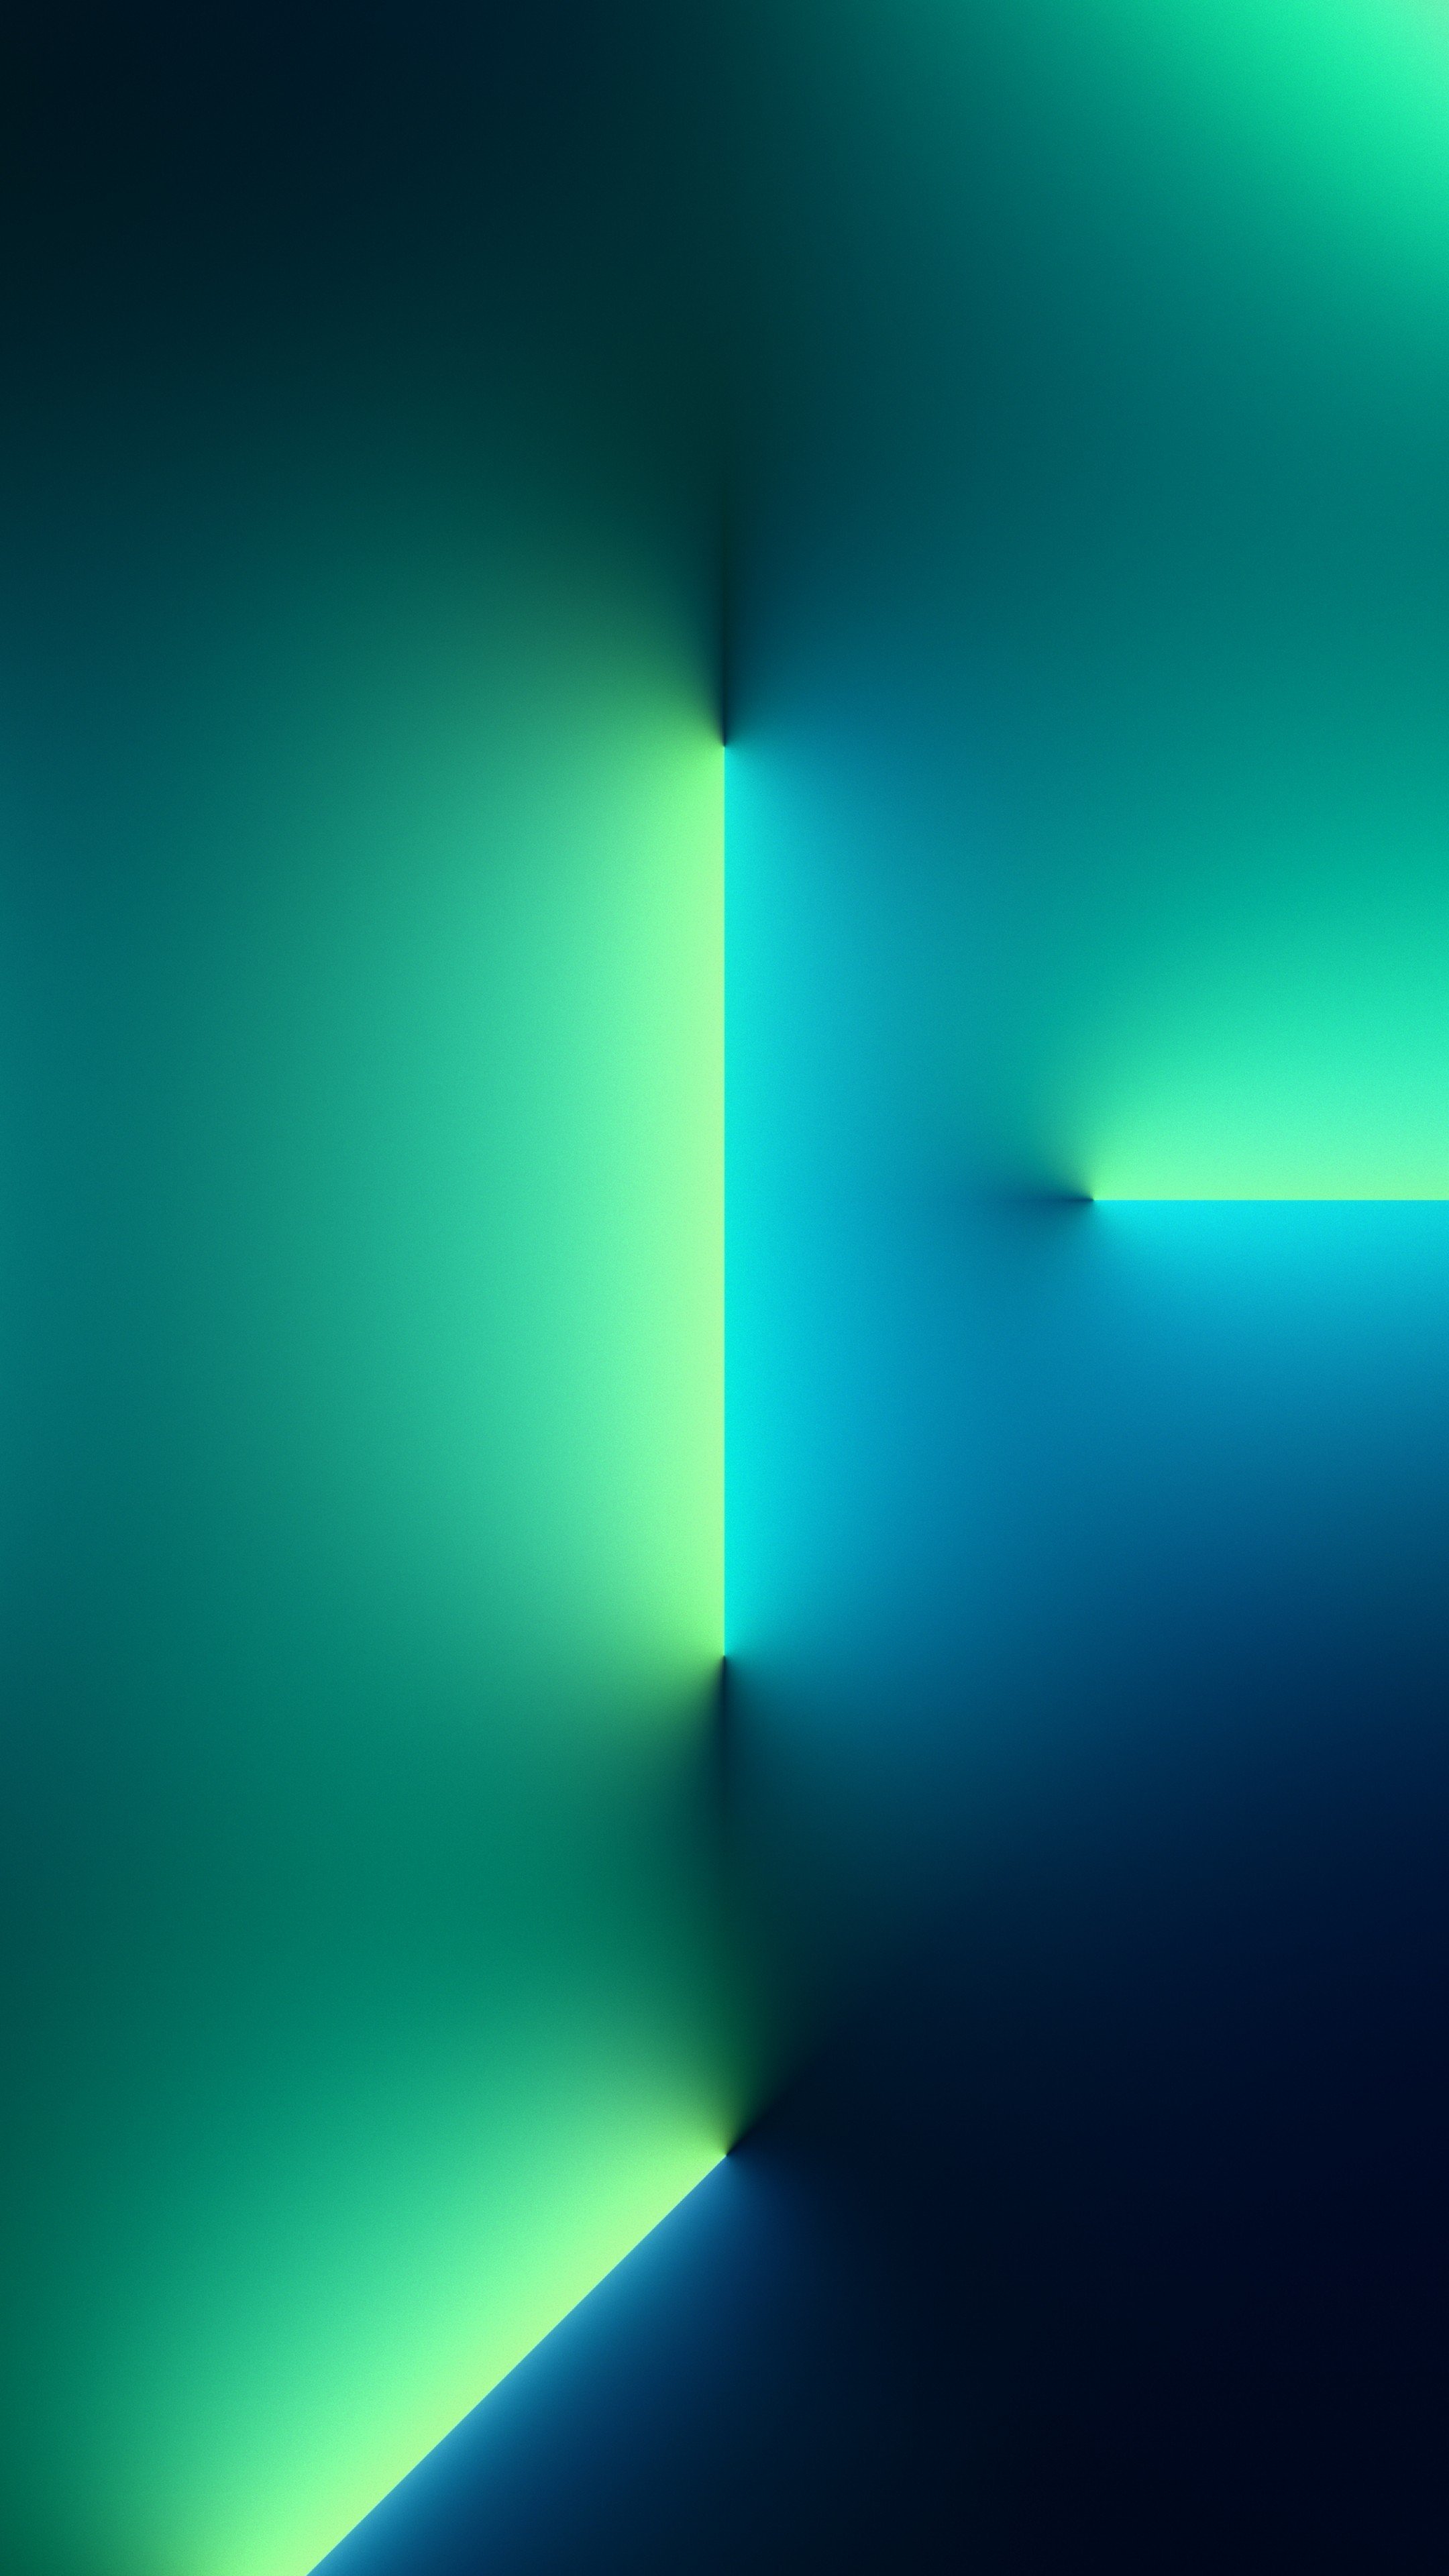 Wallpaper iPhone 13 Pro, light beams, abstract, iOS Apple September 2021 Event, 4K, OS